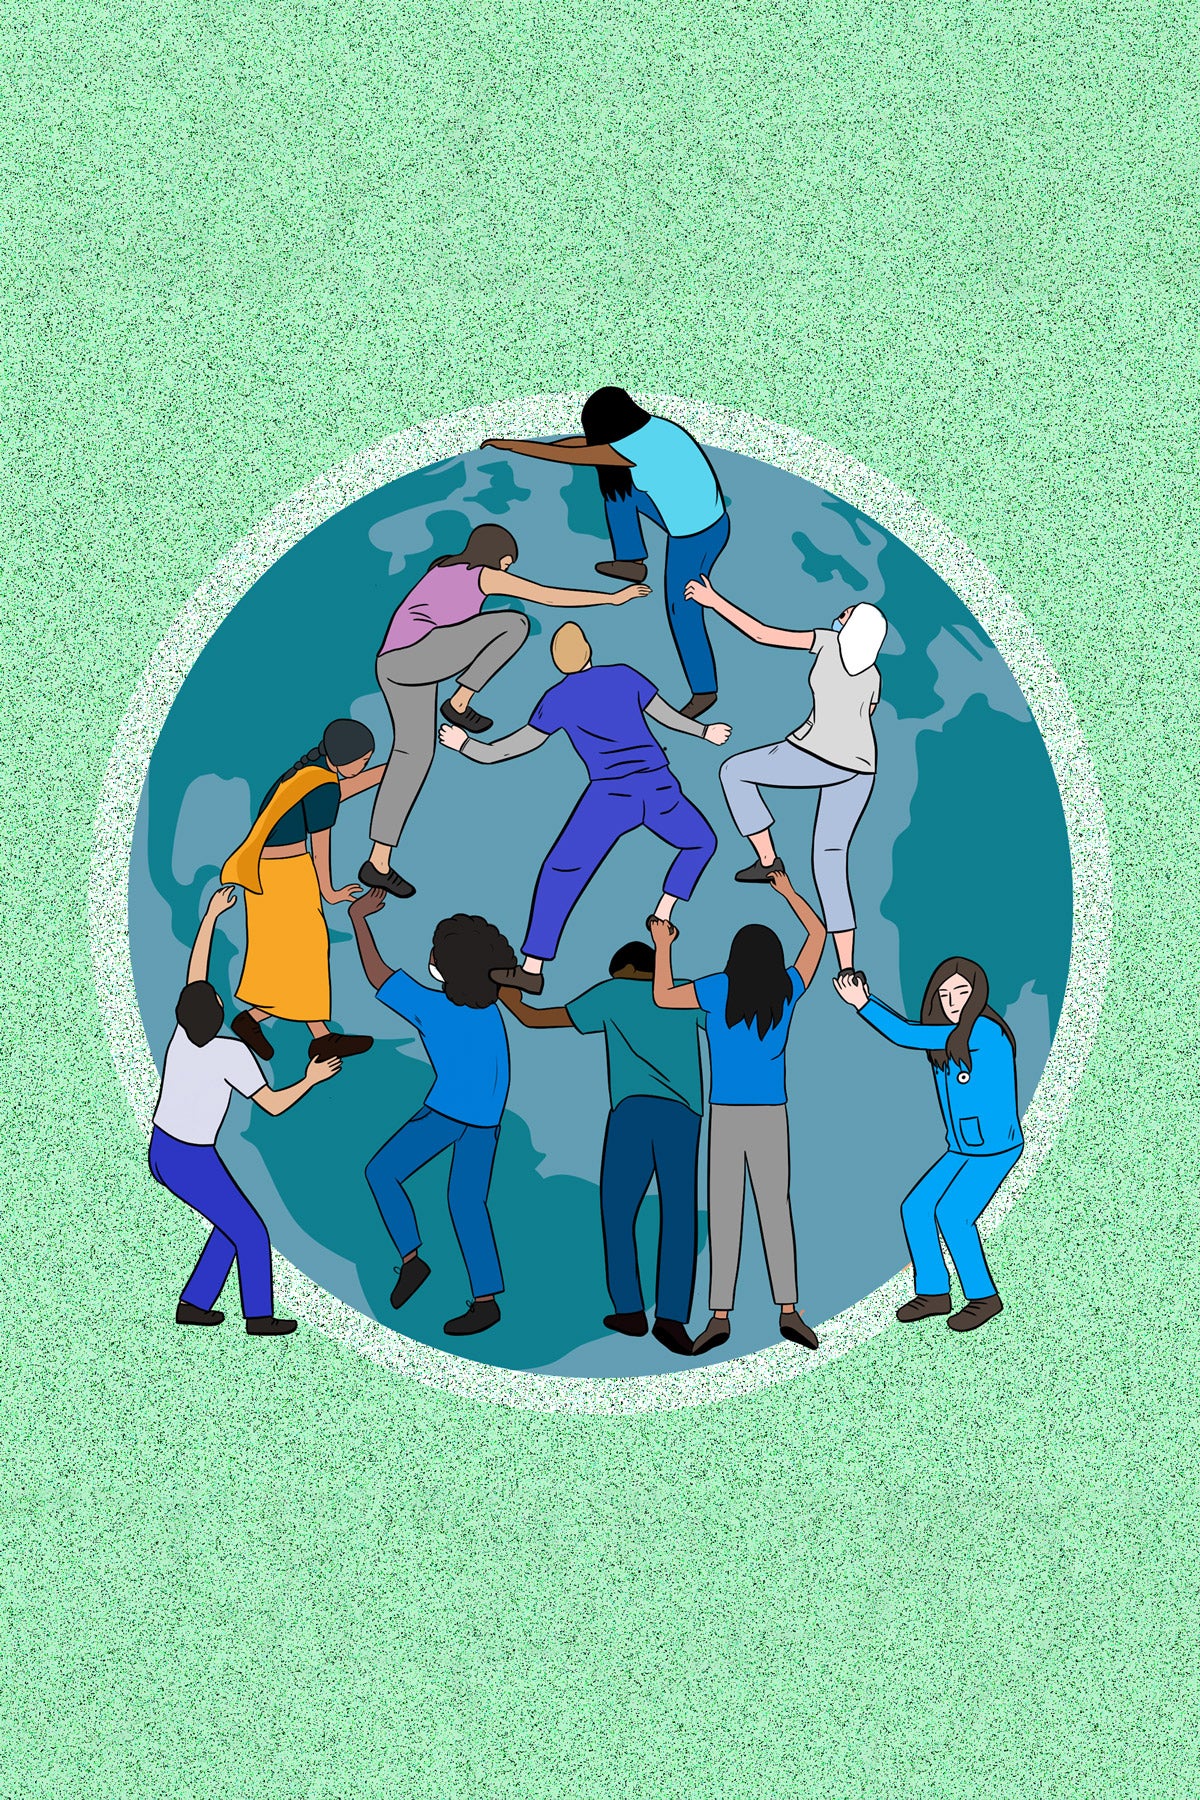 Illustration: Women figures of different skin tones and races climb on top of each other against a globe. The illustration is on a speckled sea-green background.